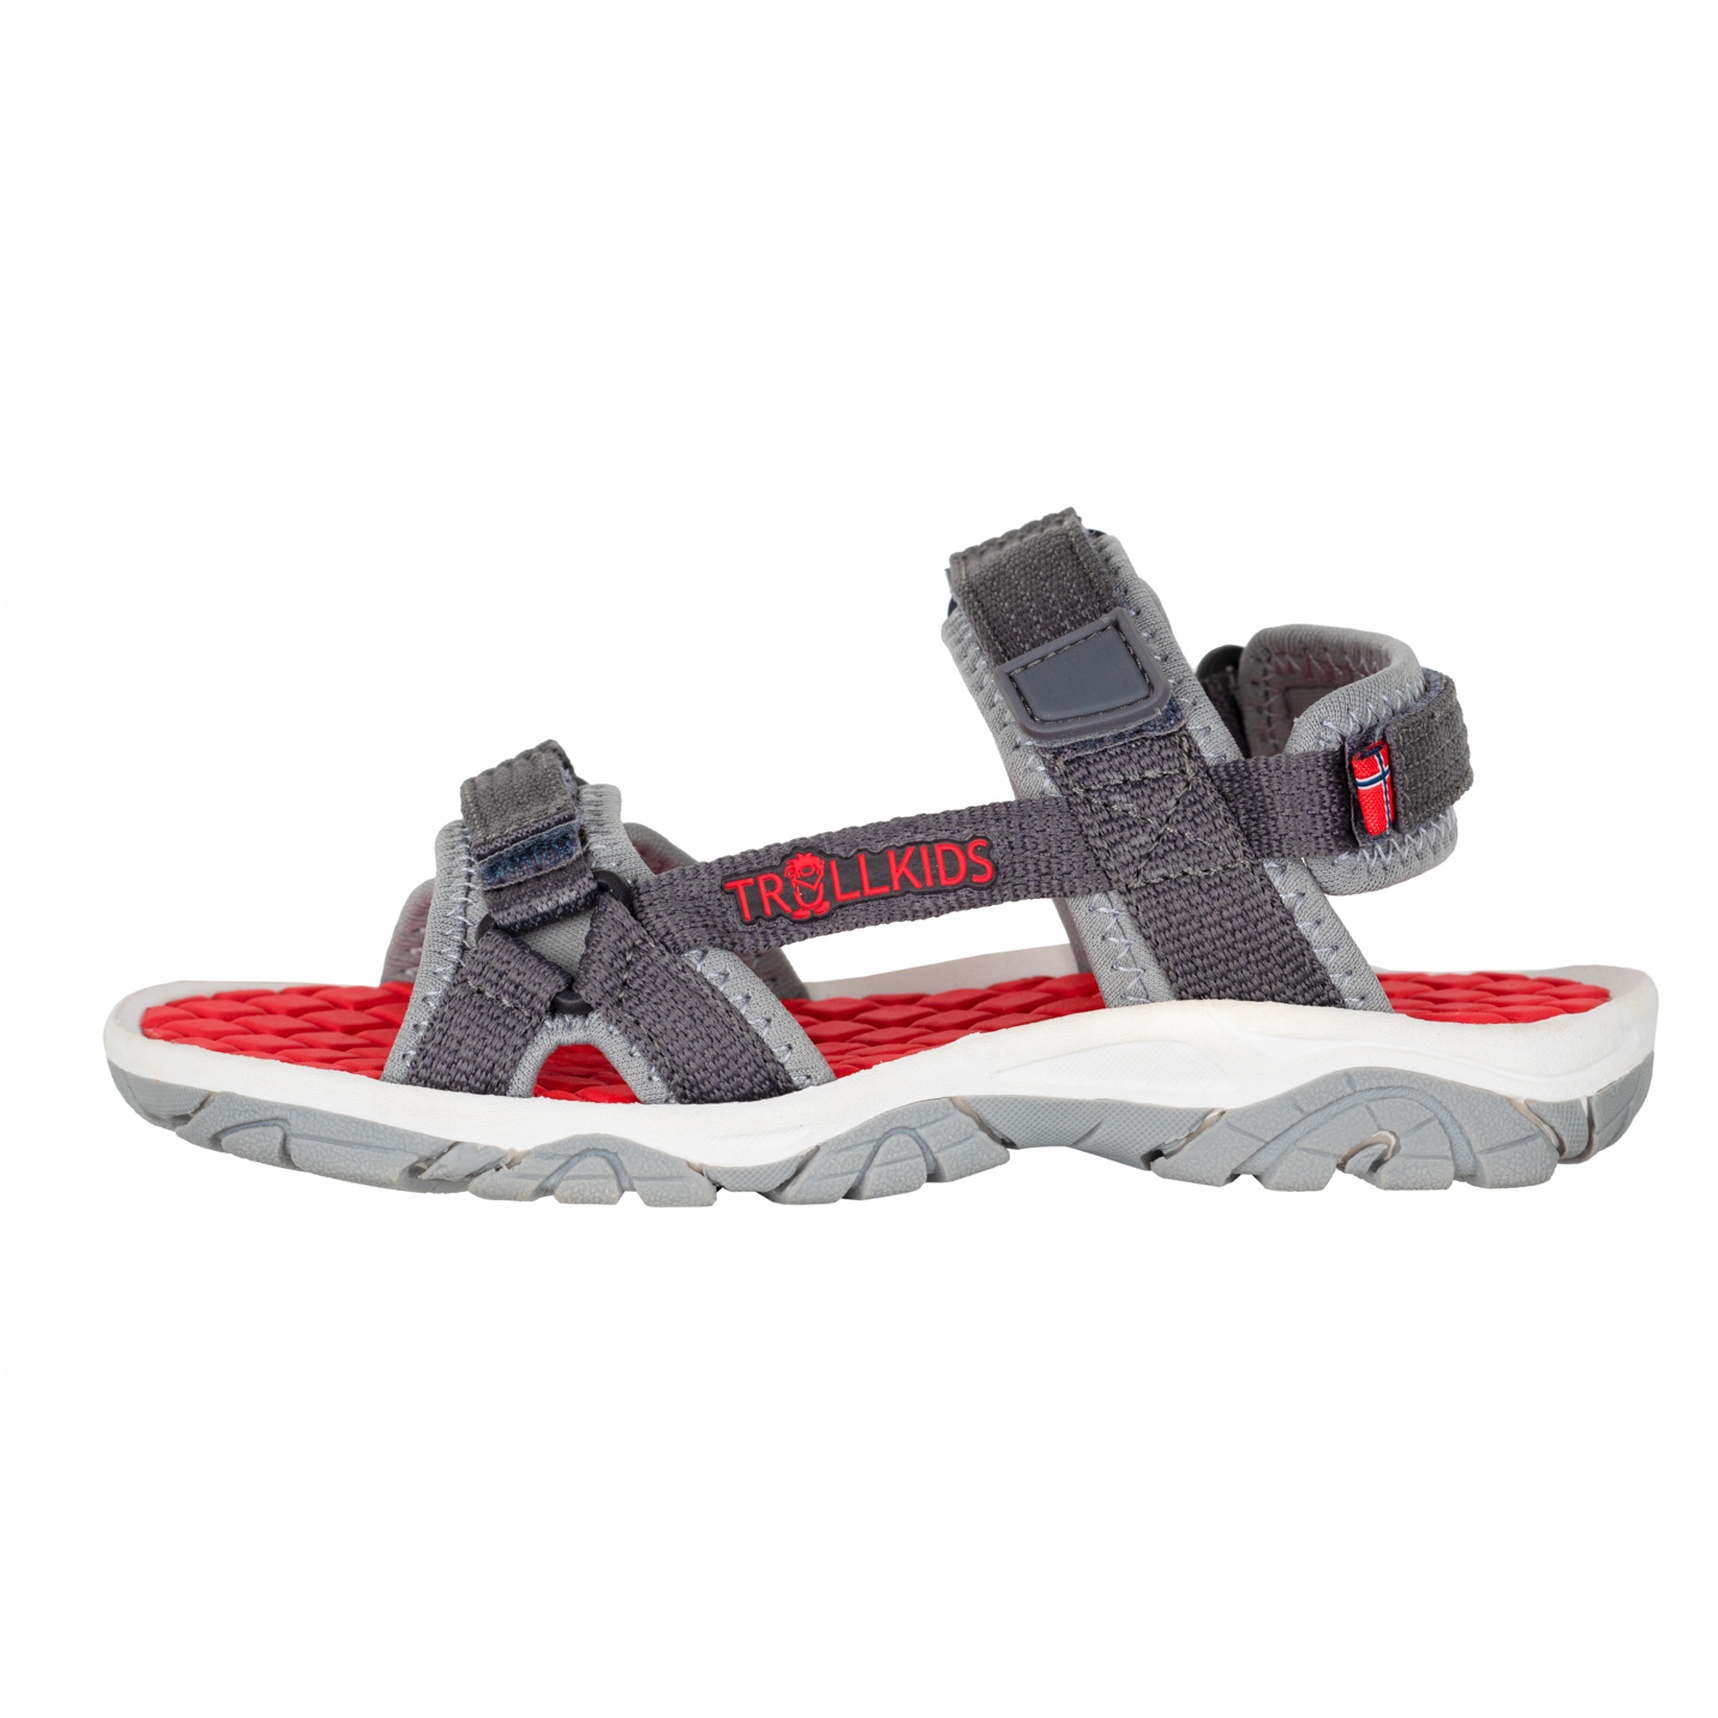 Picture of Trollkids Oslofjord Kids Sandals - Anthracite/Mystic Red